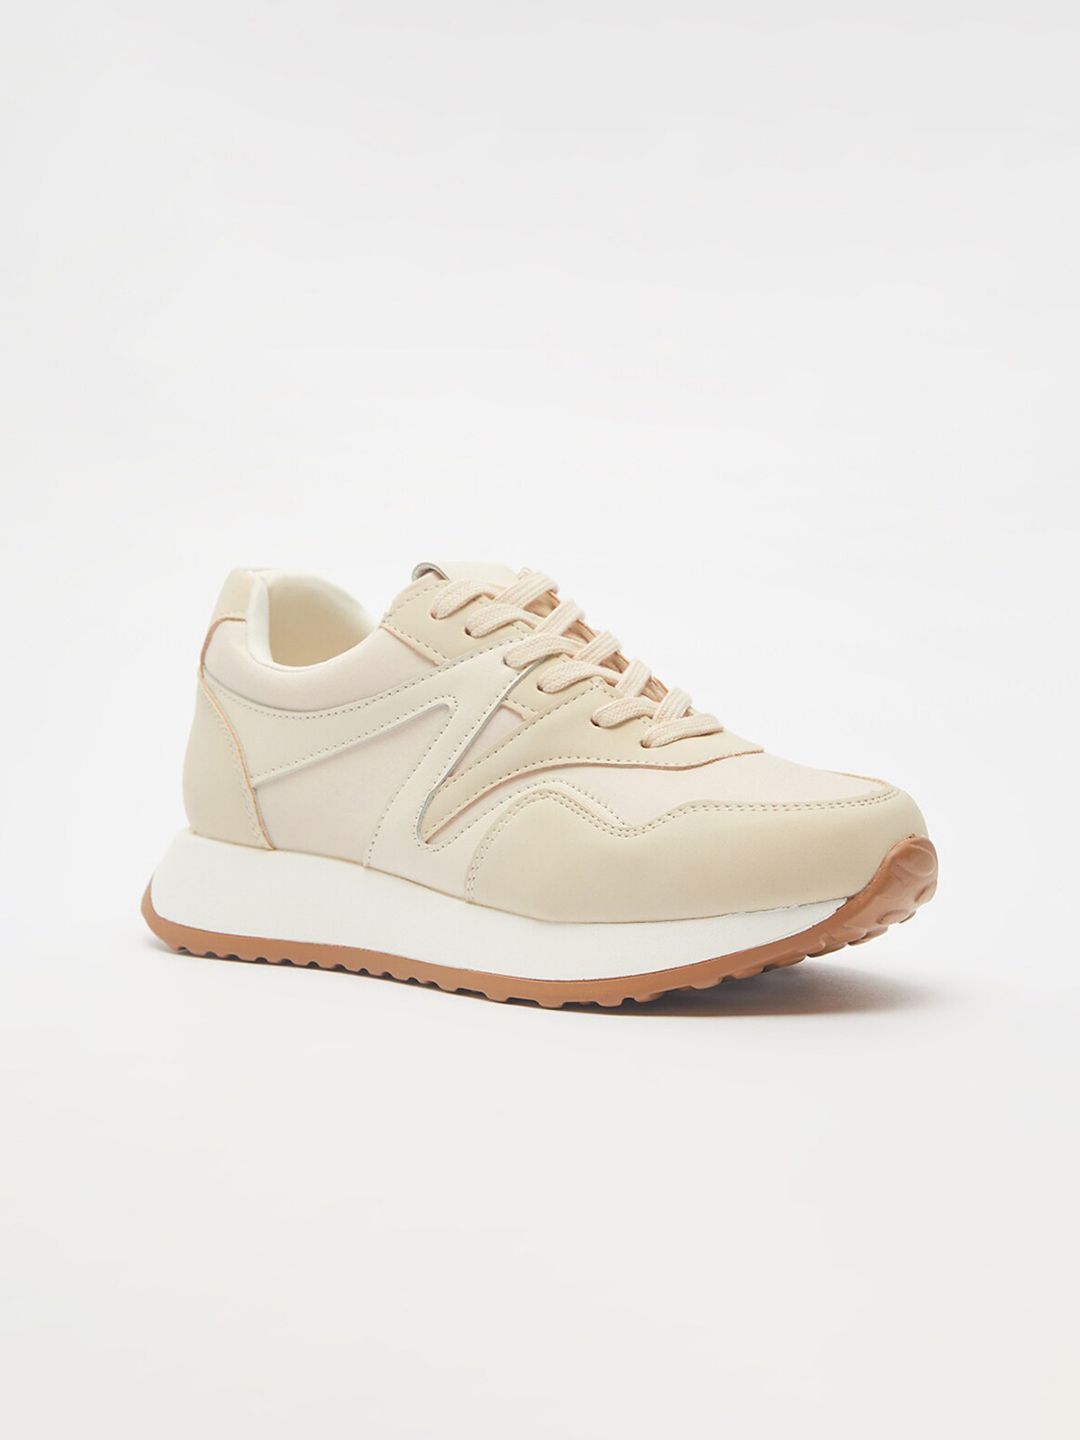 shoexpress Women Cream-Coloured Running Non-Marking Shoes Price in India